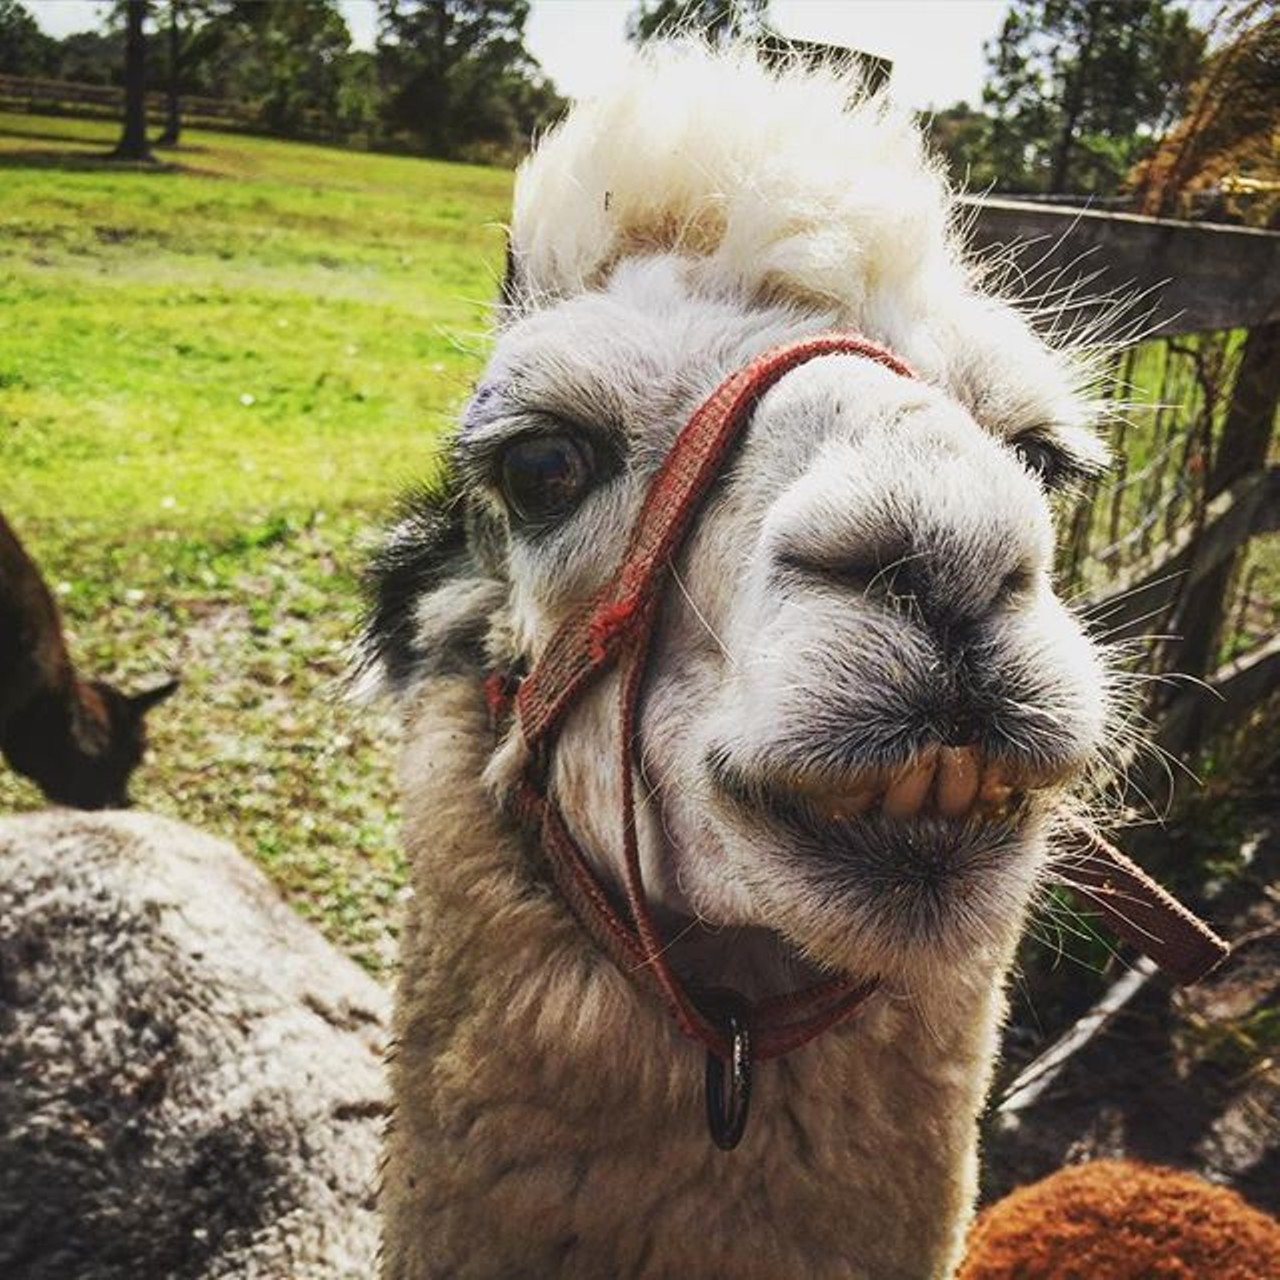 Chantilly Ridge Alpaca Farm, Port Orange
1975 H.L. Ainsley Drive  Port Orange
A family owned and operated 12 acre farm, Chantilly cares for over 100 animals, including alpacas in a variety of colors.
Photo via katafer1 on Instagram